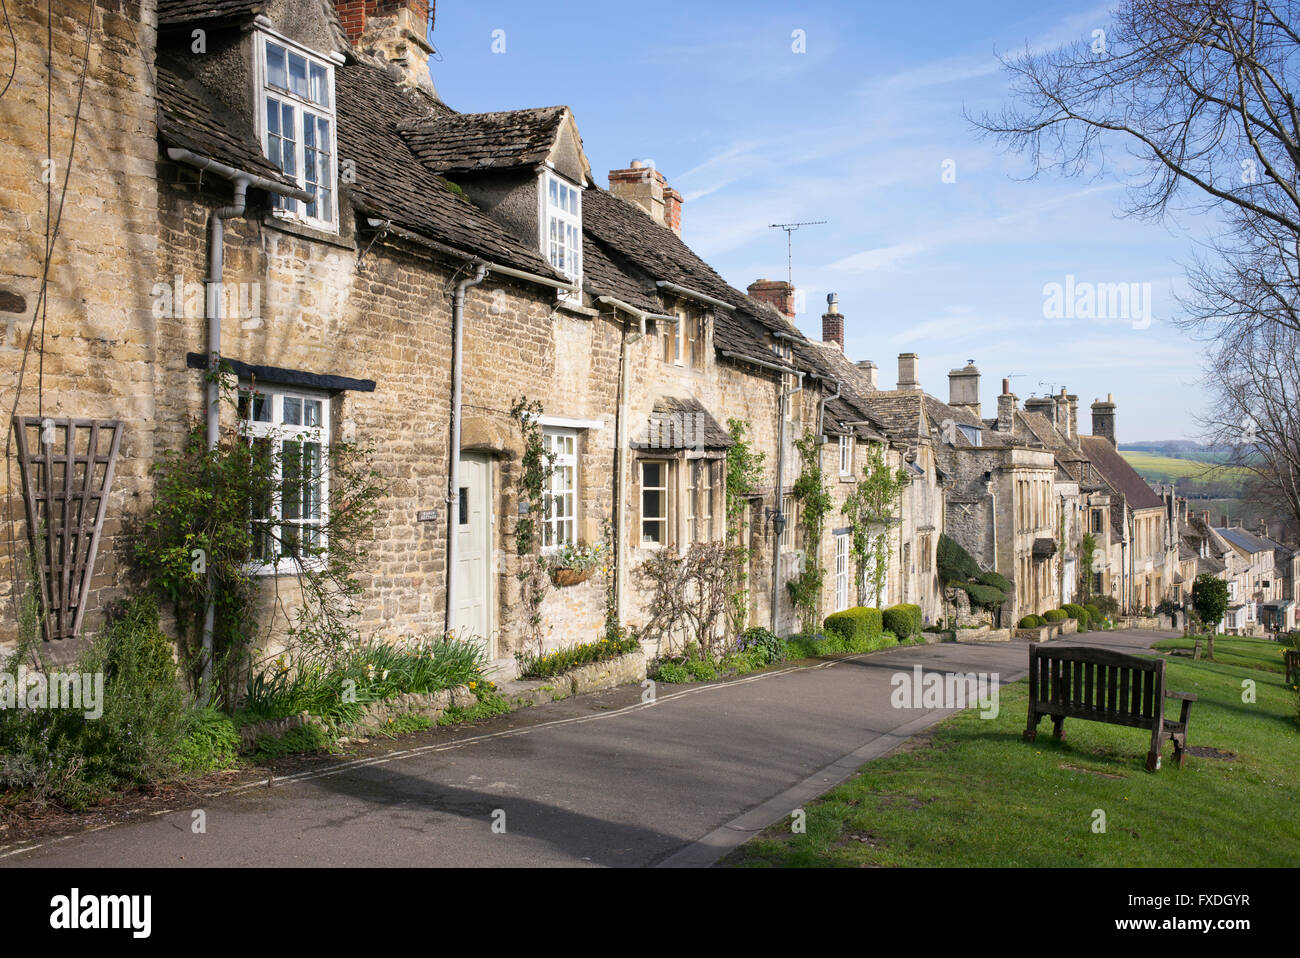 Cotswold Cottages on Burford high street. Cotswolds, England Stock Photo